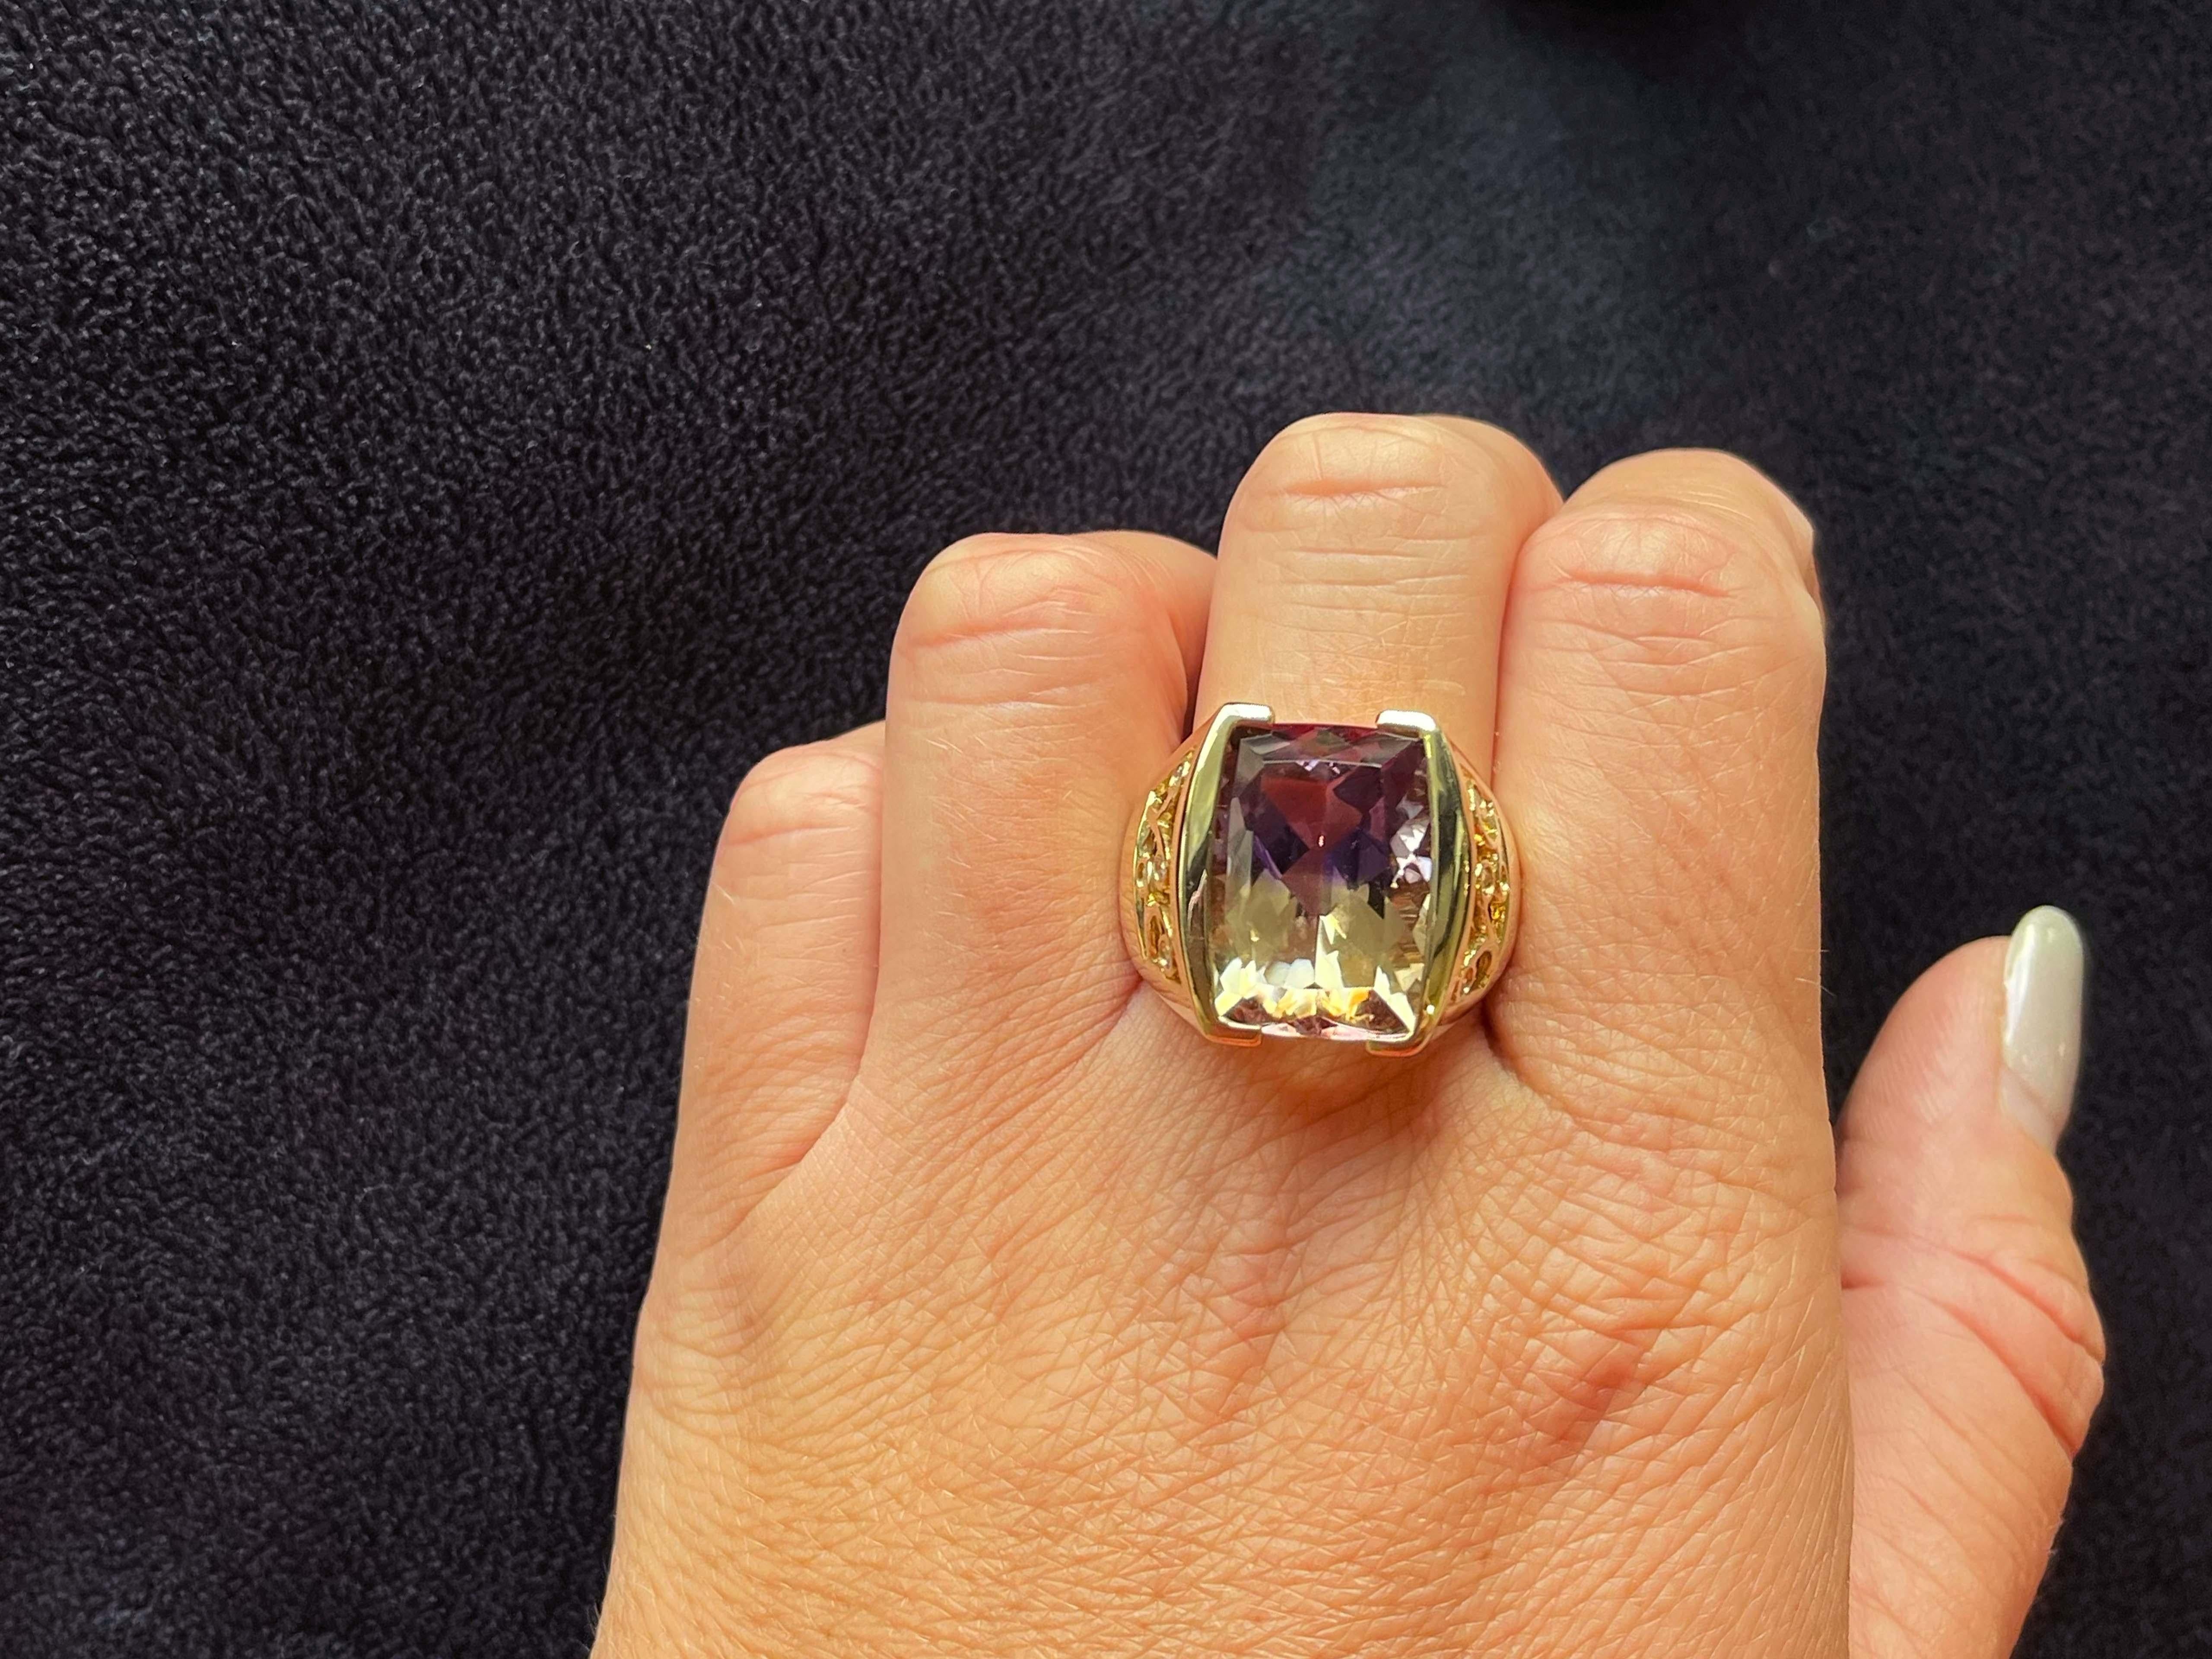 Item Specifications:

Metal: 14k Yellow Gold

Ring Weight: 14.9 grams

Ring Size: 9

Gemstone Specifications:

Gemstone: Ametrine

Ametrine Measurements: 18.03 mm x 13.6 mm x 8.61

Ametrine Carat Weight: ~19.38 Carats

Color: Purple and